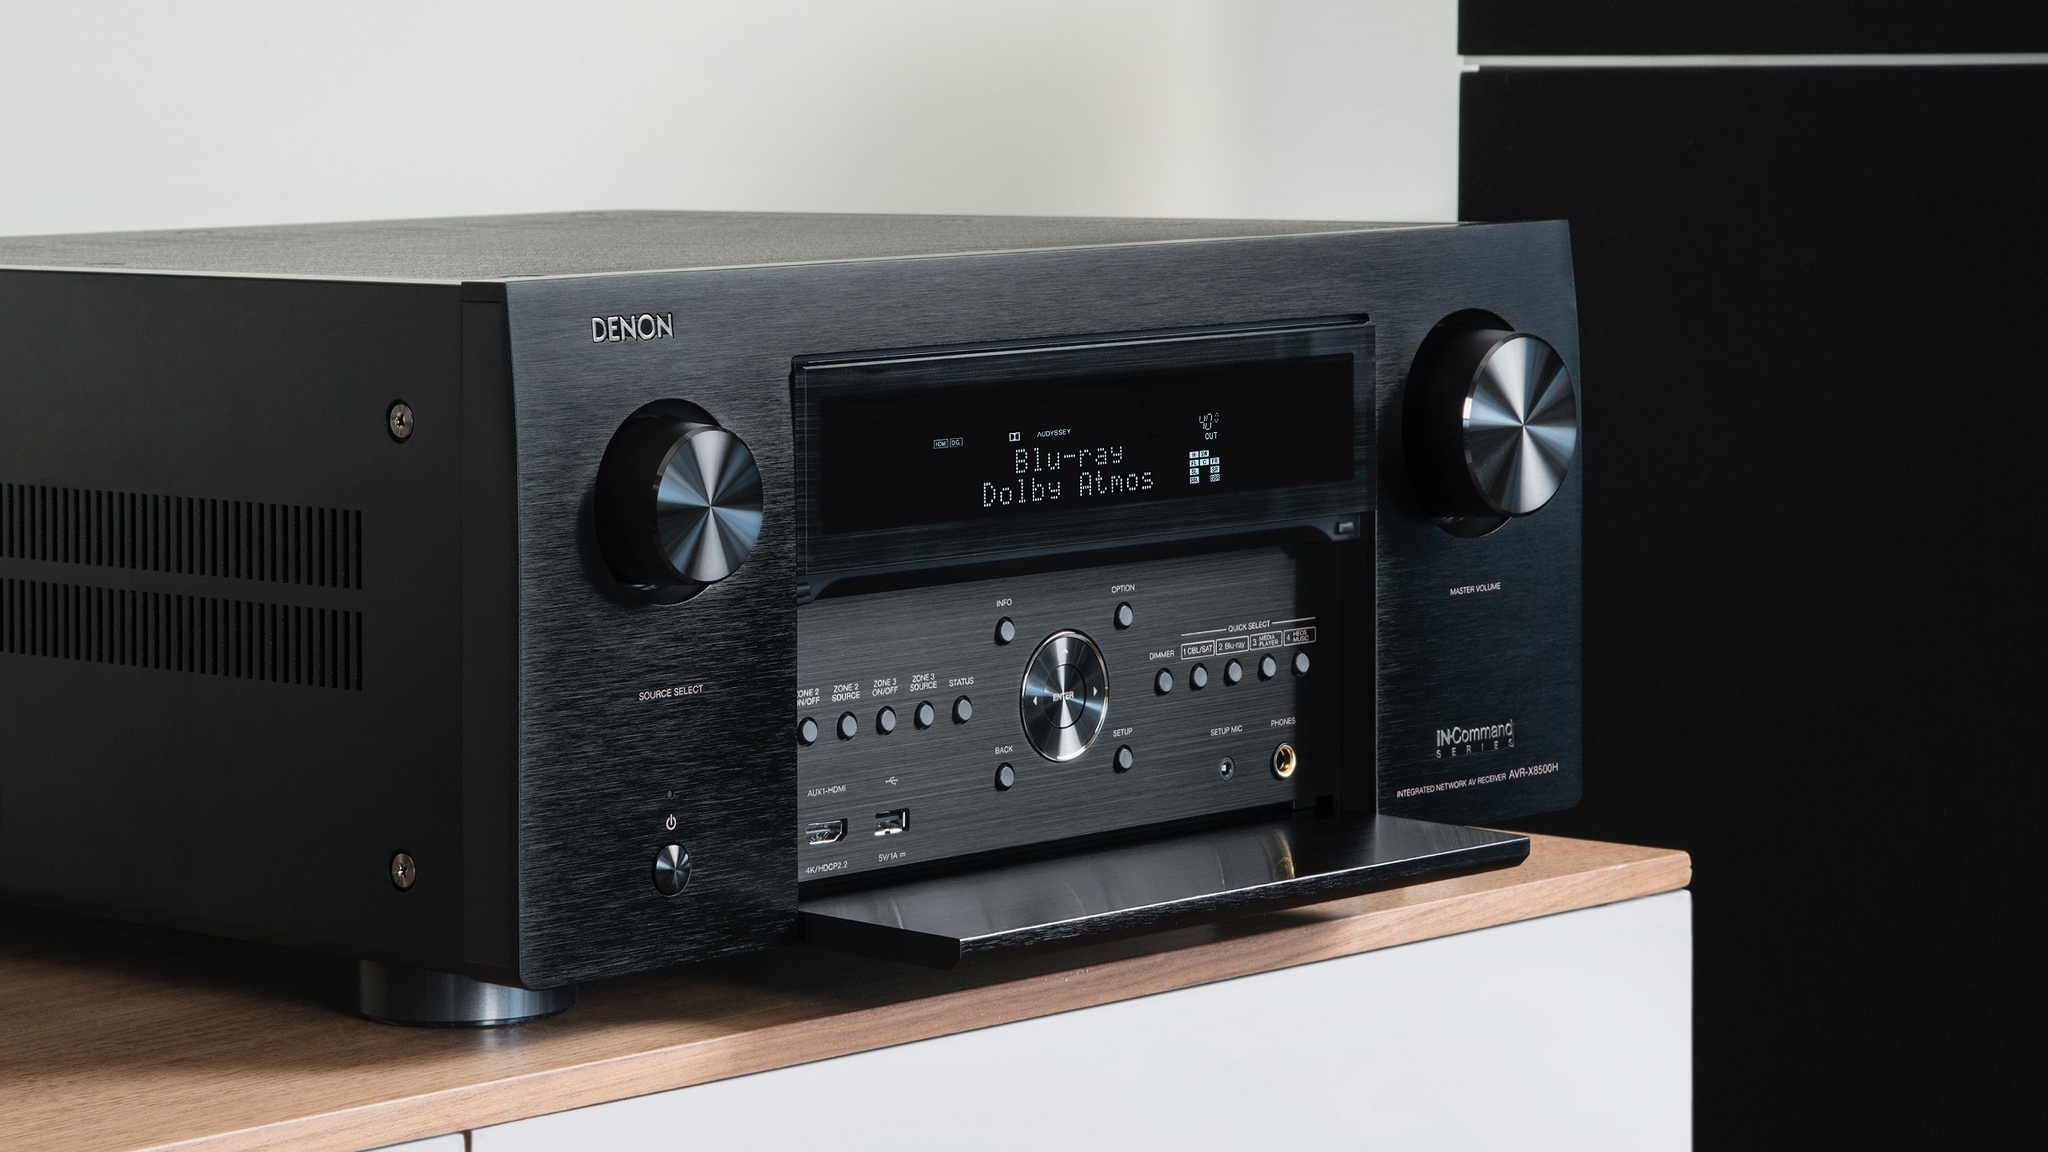 Denon Avr X8500h Flagship Receiver on a flat surface